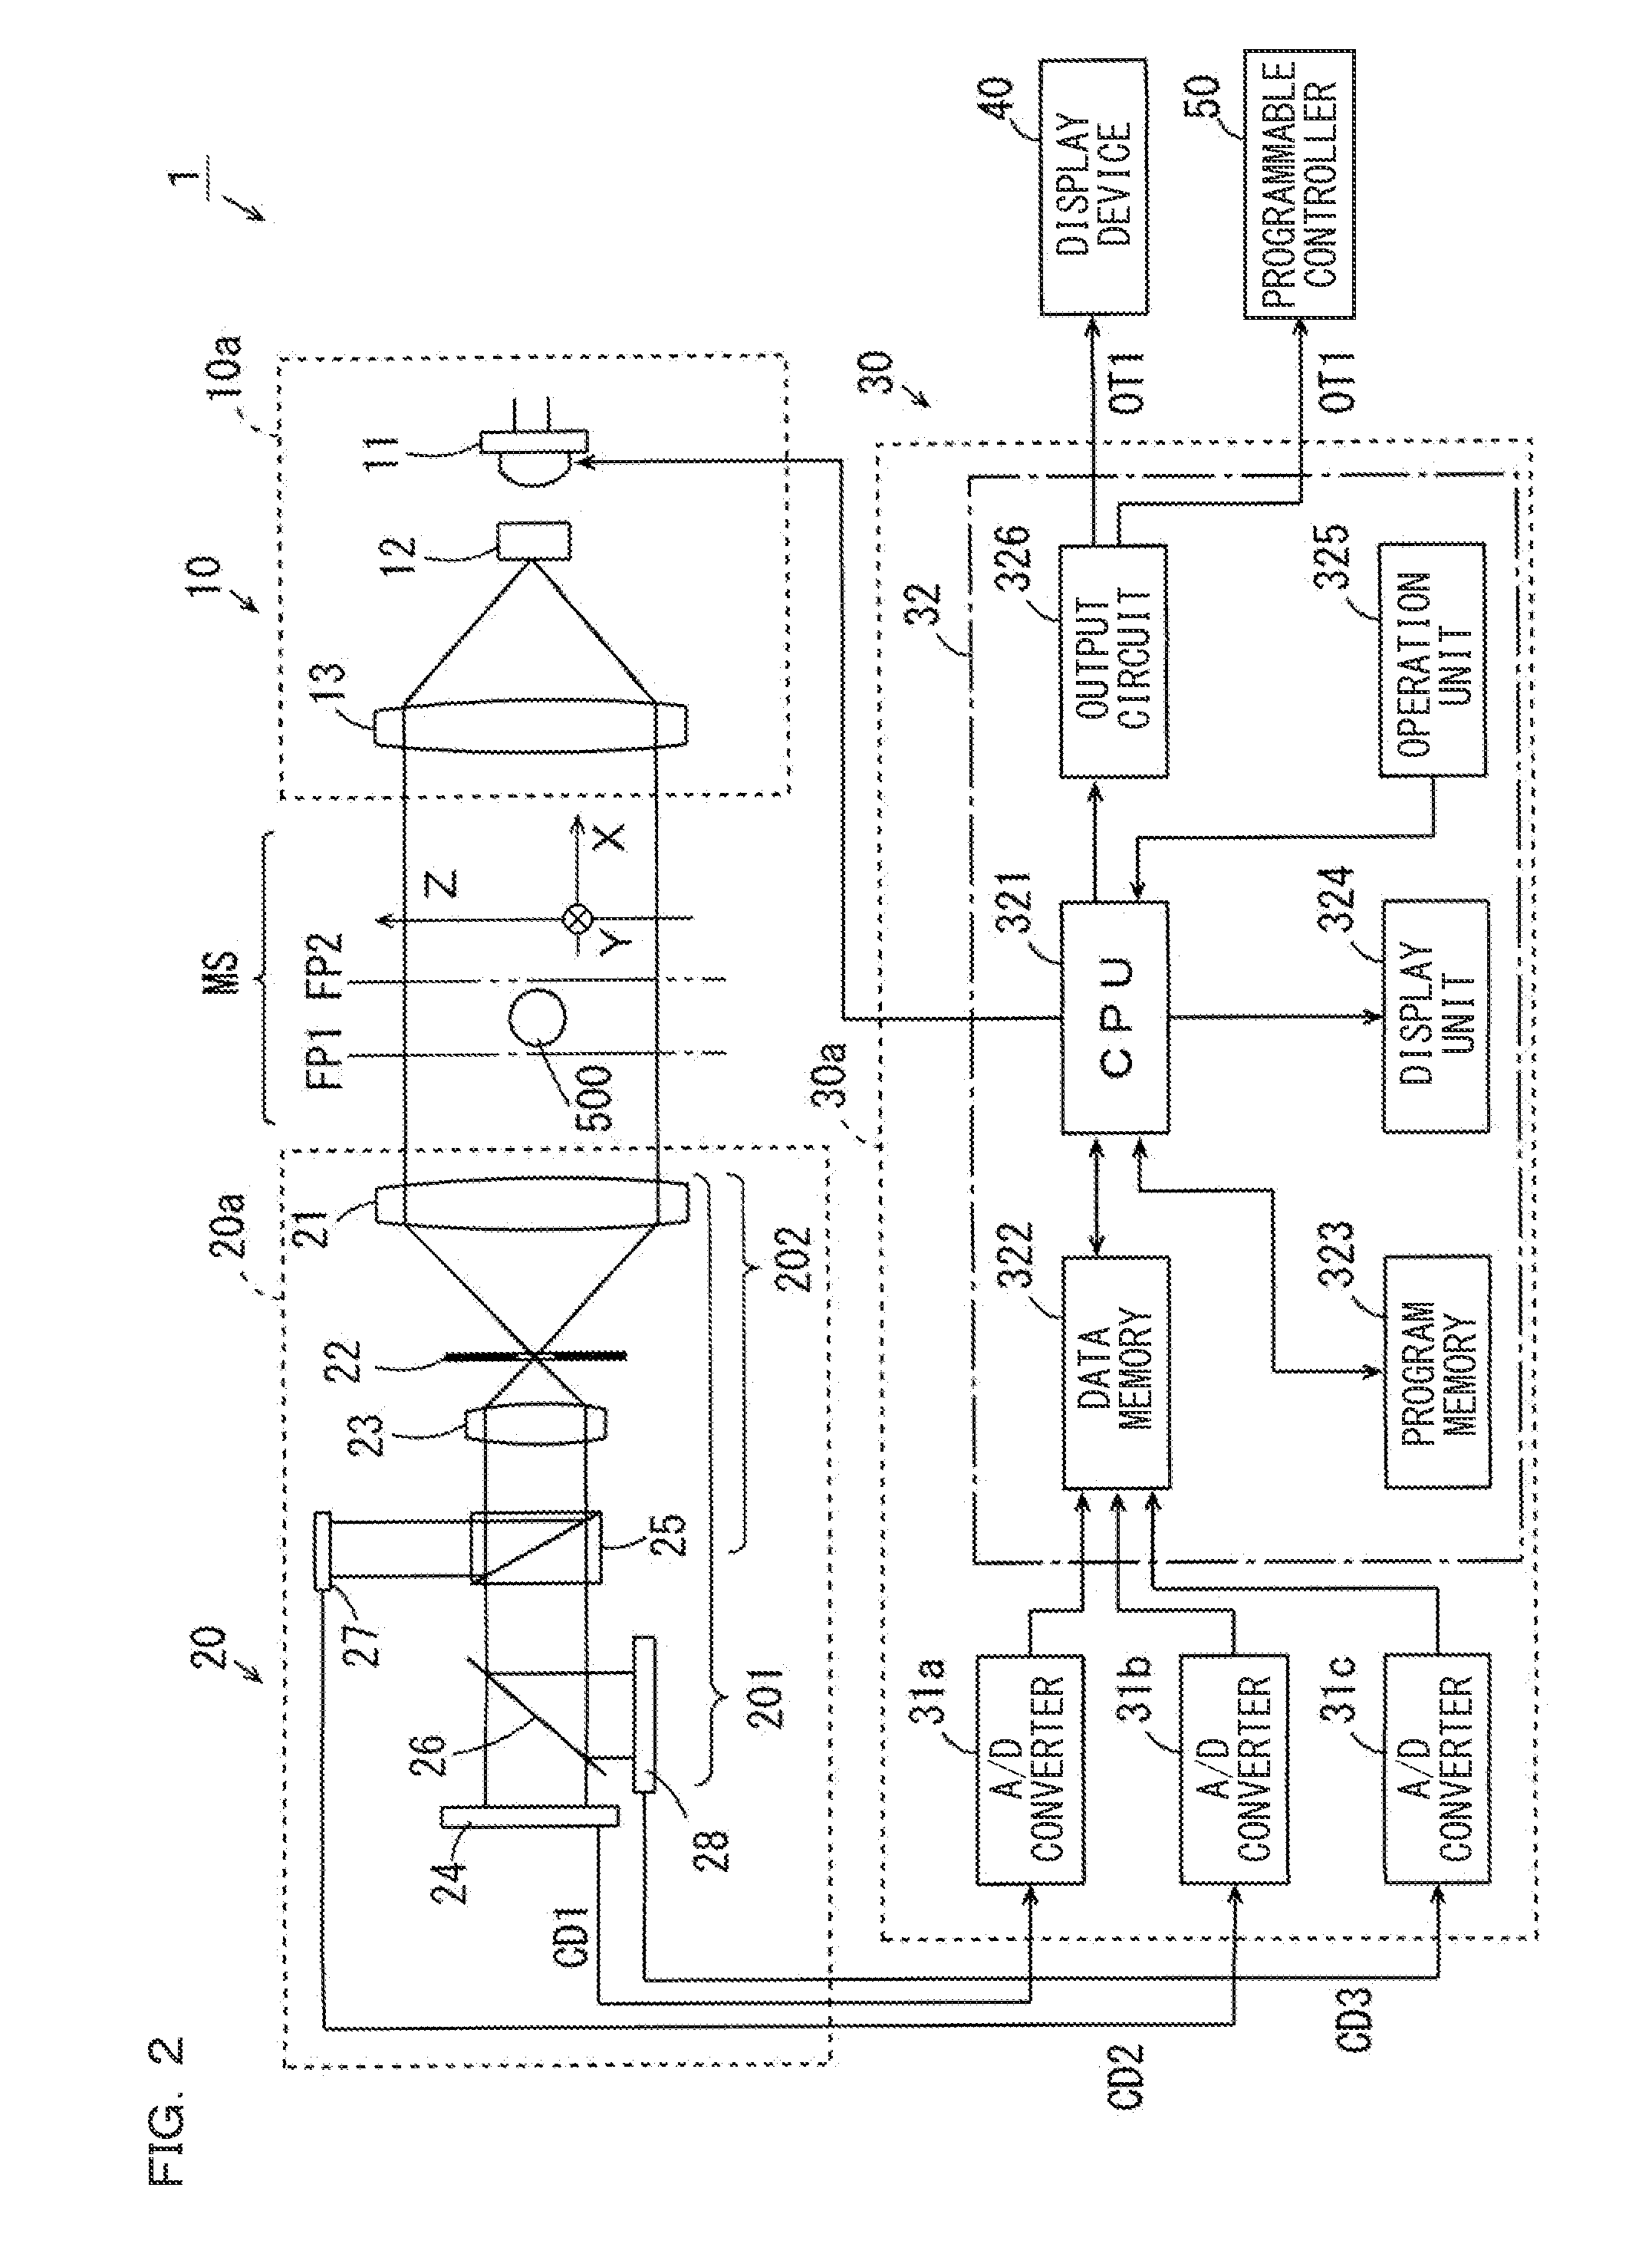 Optical measuring device with positional displacement detection